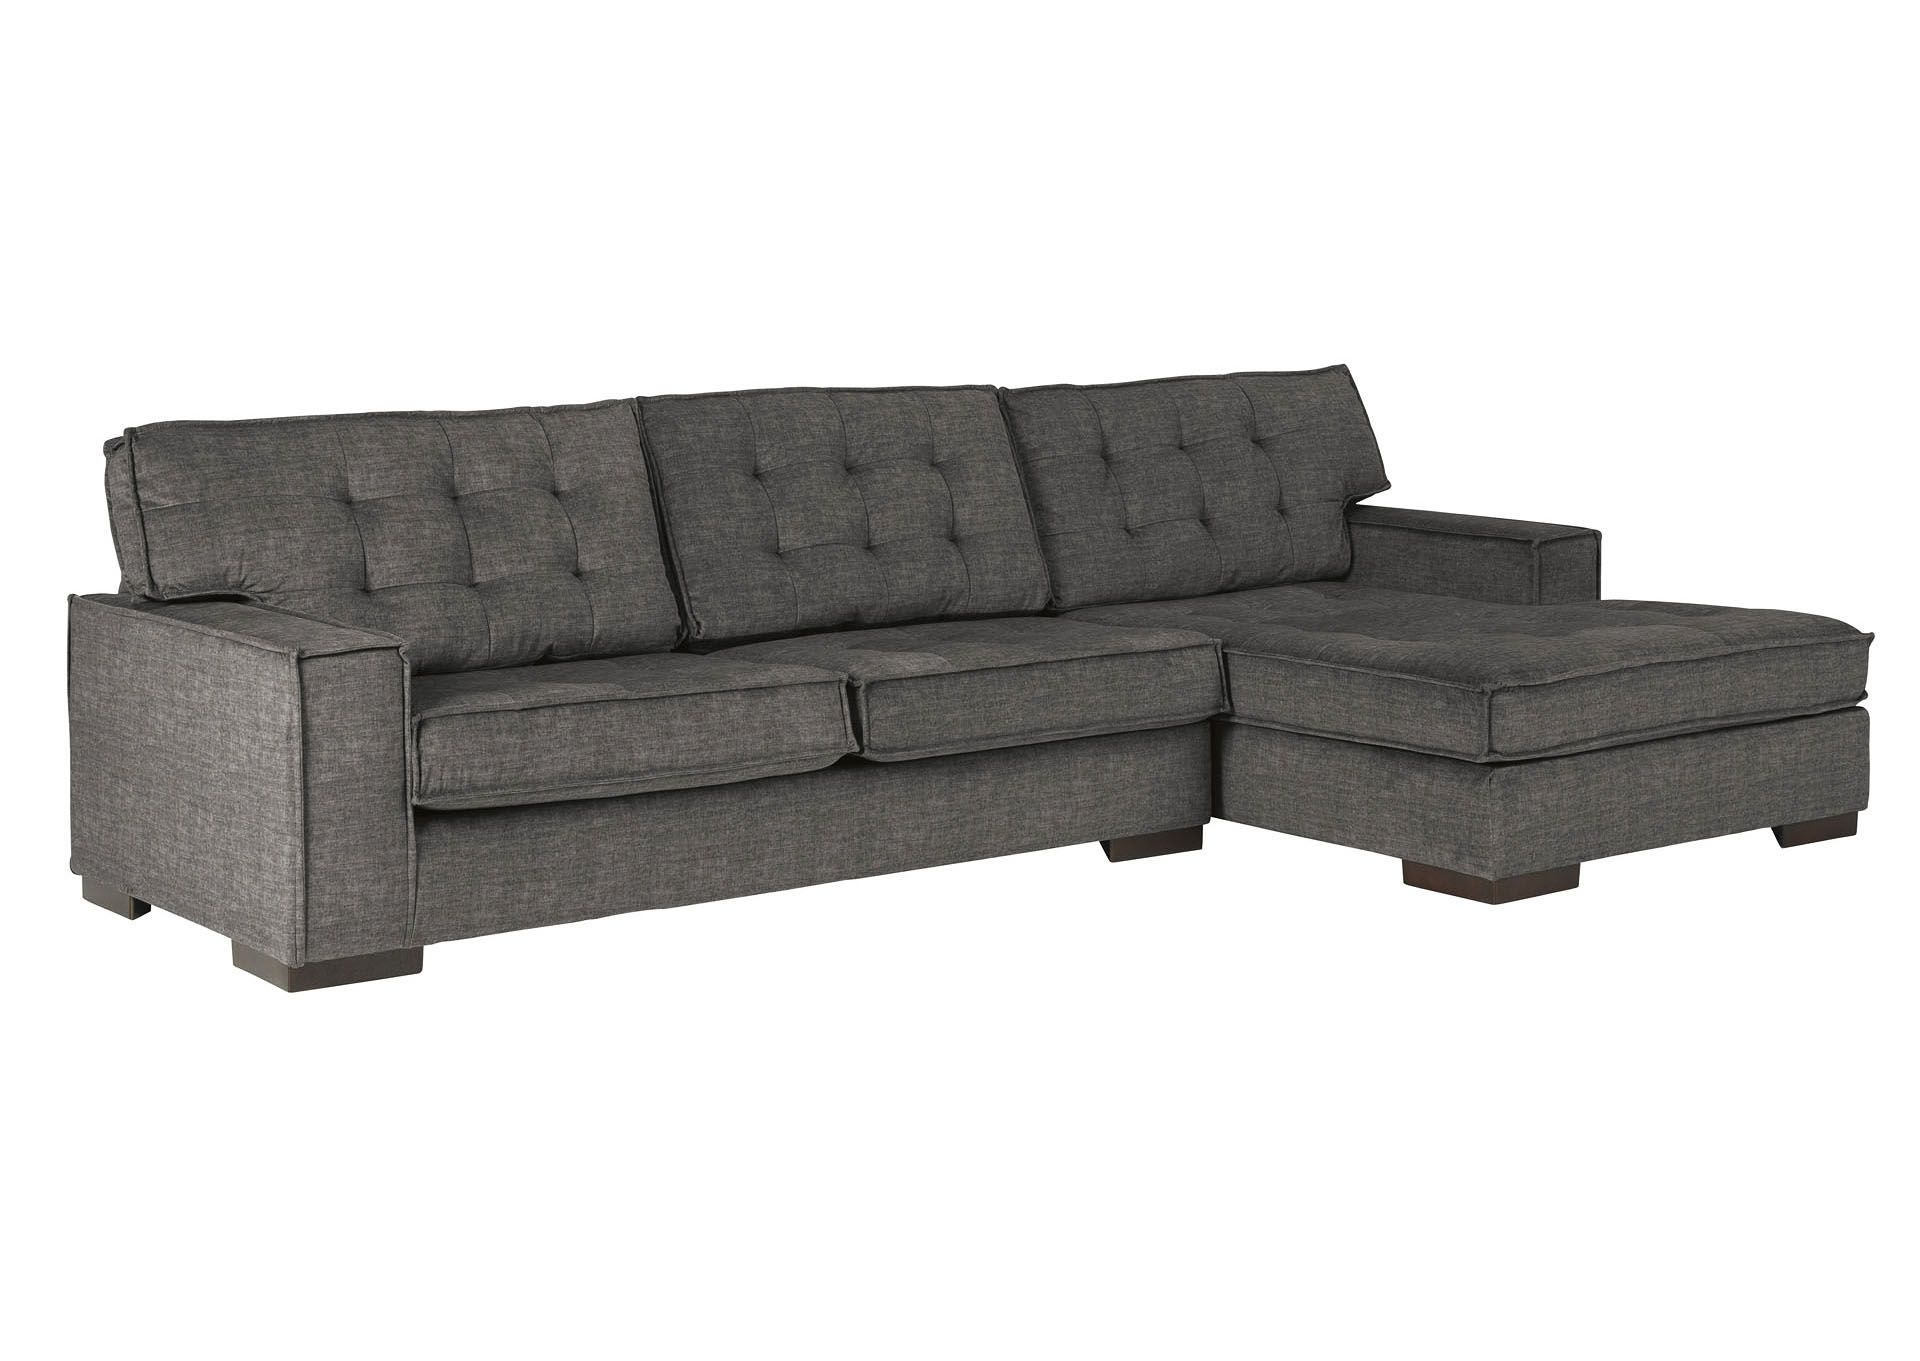 Coulee Point 2 Piece Sectional With Chaise Ashley Inside 2pc Burland Contemporary Sectional Sofas Charcoal (View 2 of 15)